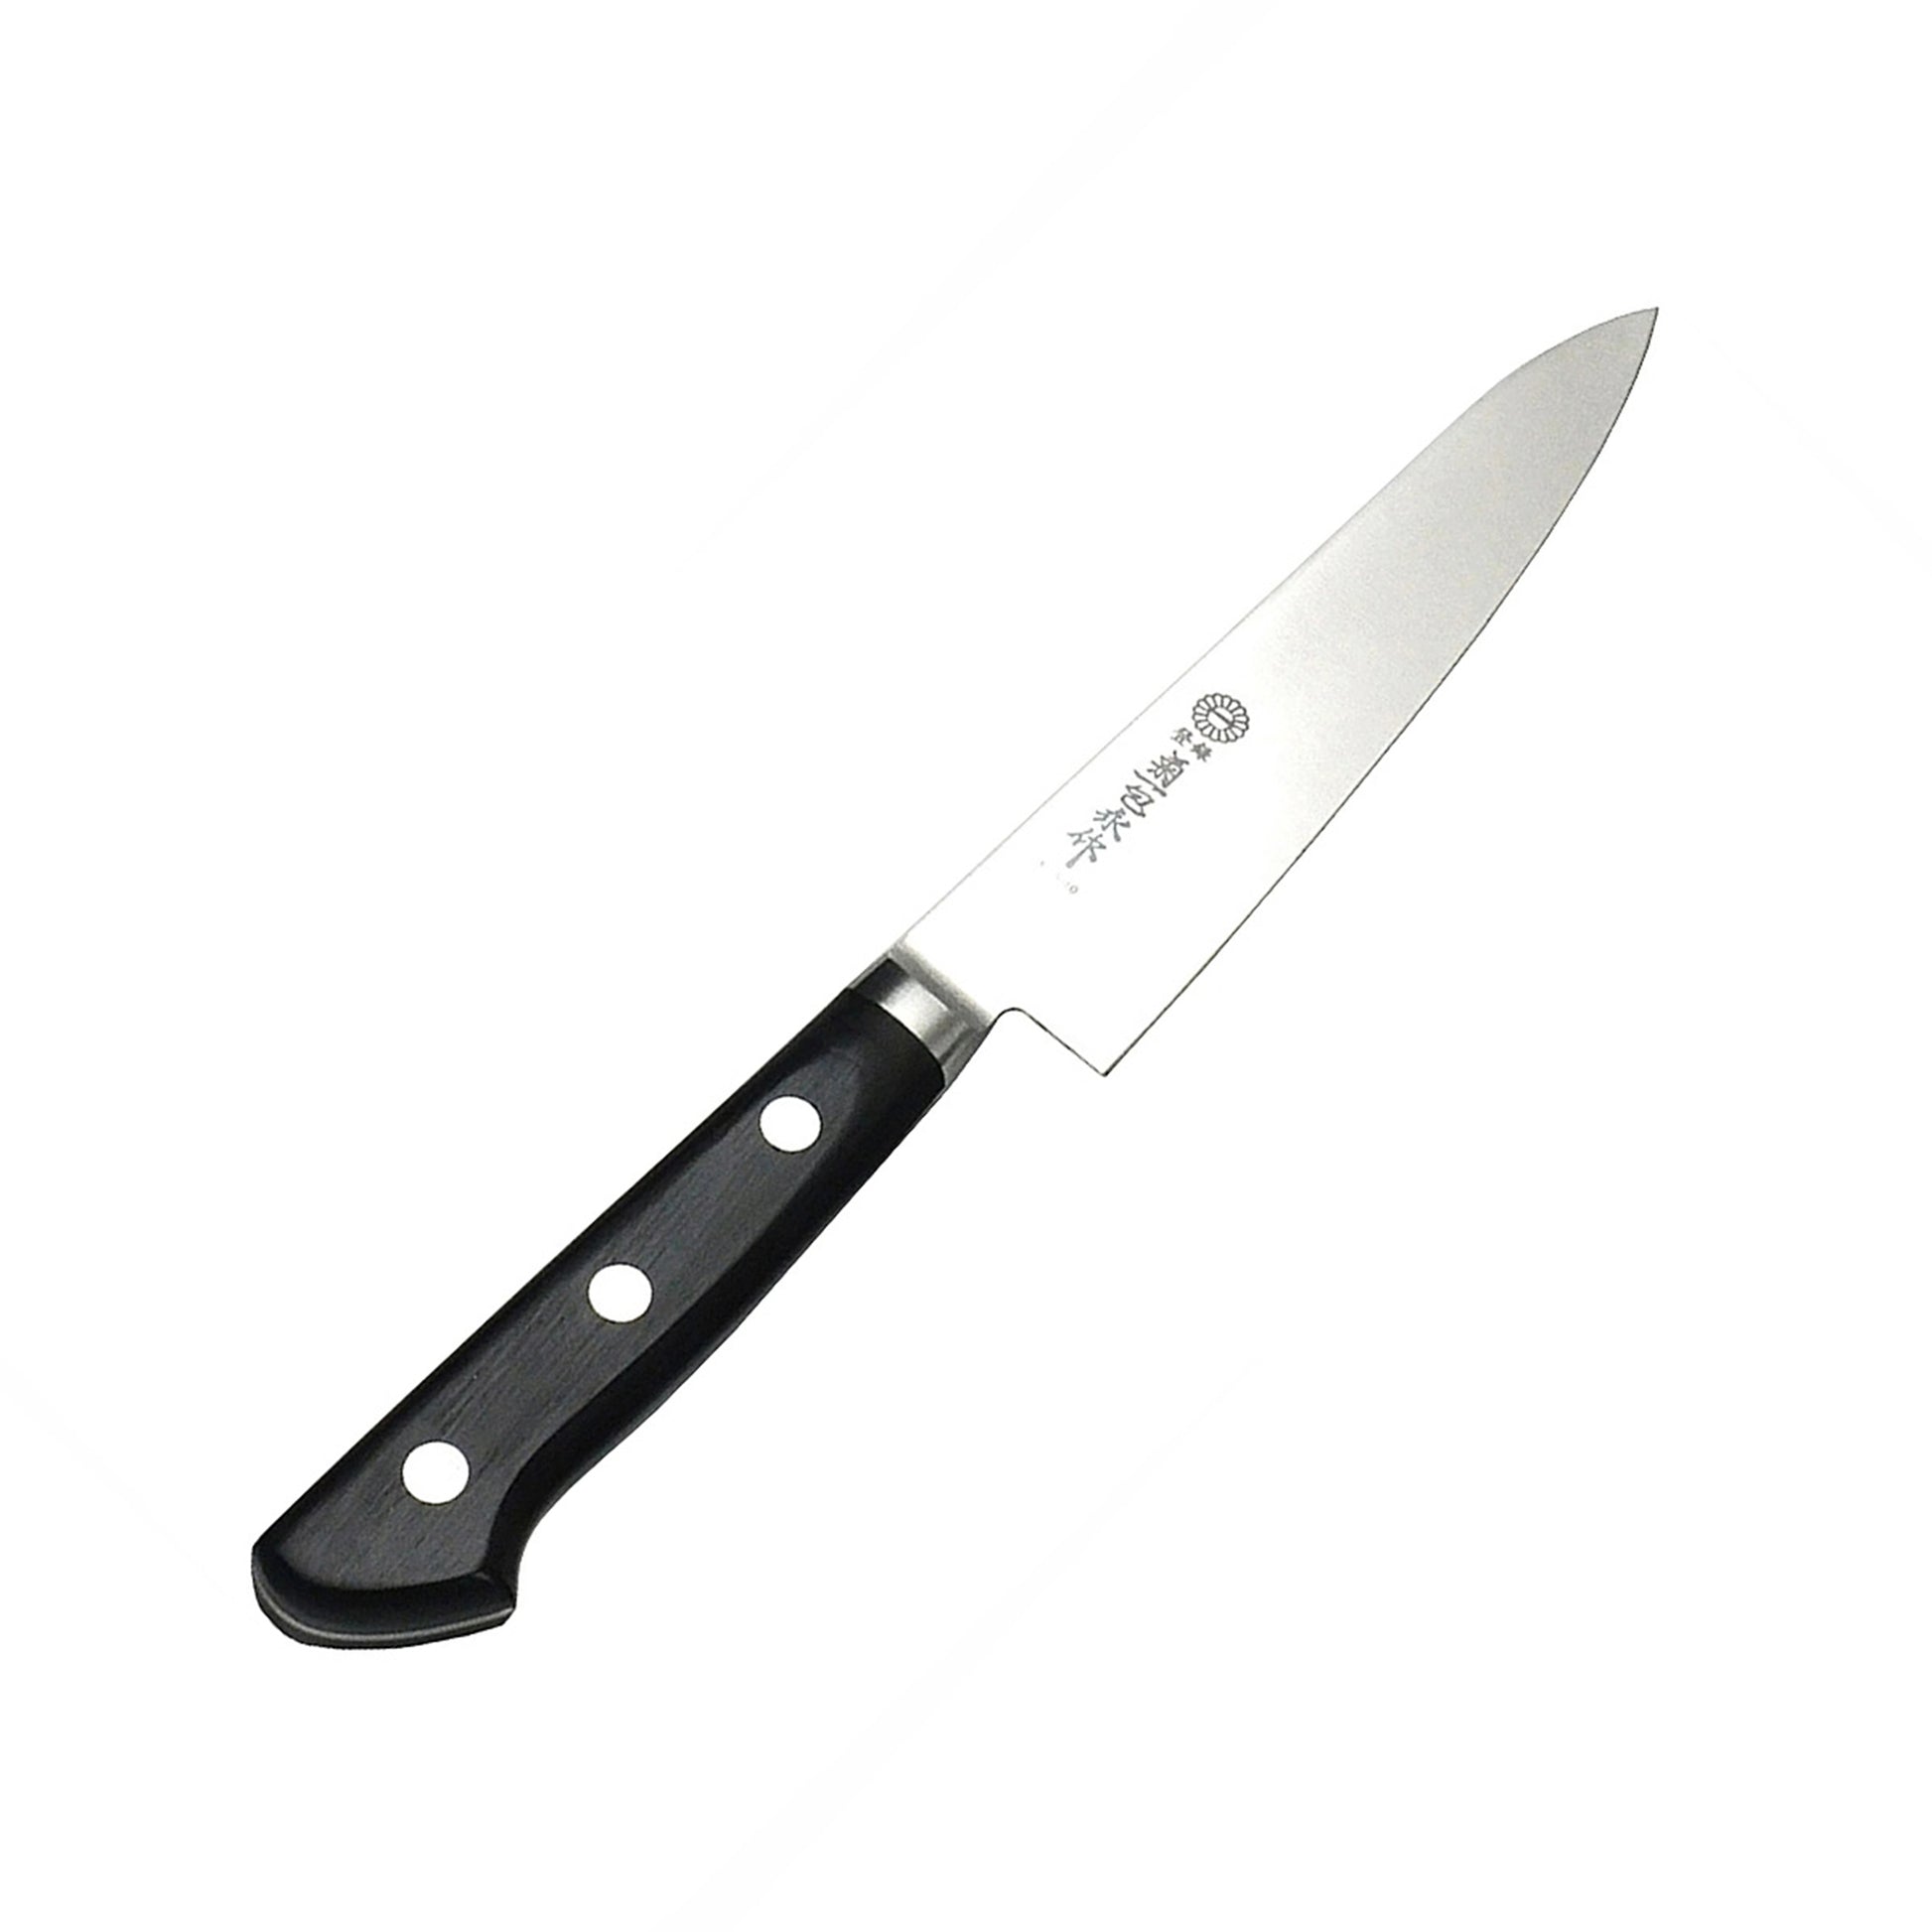 The GM Series Molybdenum Stainless Steel Petty knife offers excellent edge retention, sharpness, and ease of maintenance. Crafted by renowned Japanese cutlery brands with a long-standing tradition of excellence, these knives are the perfect companions for passionate cooking enthusiasts.